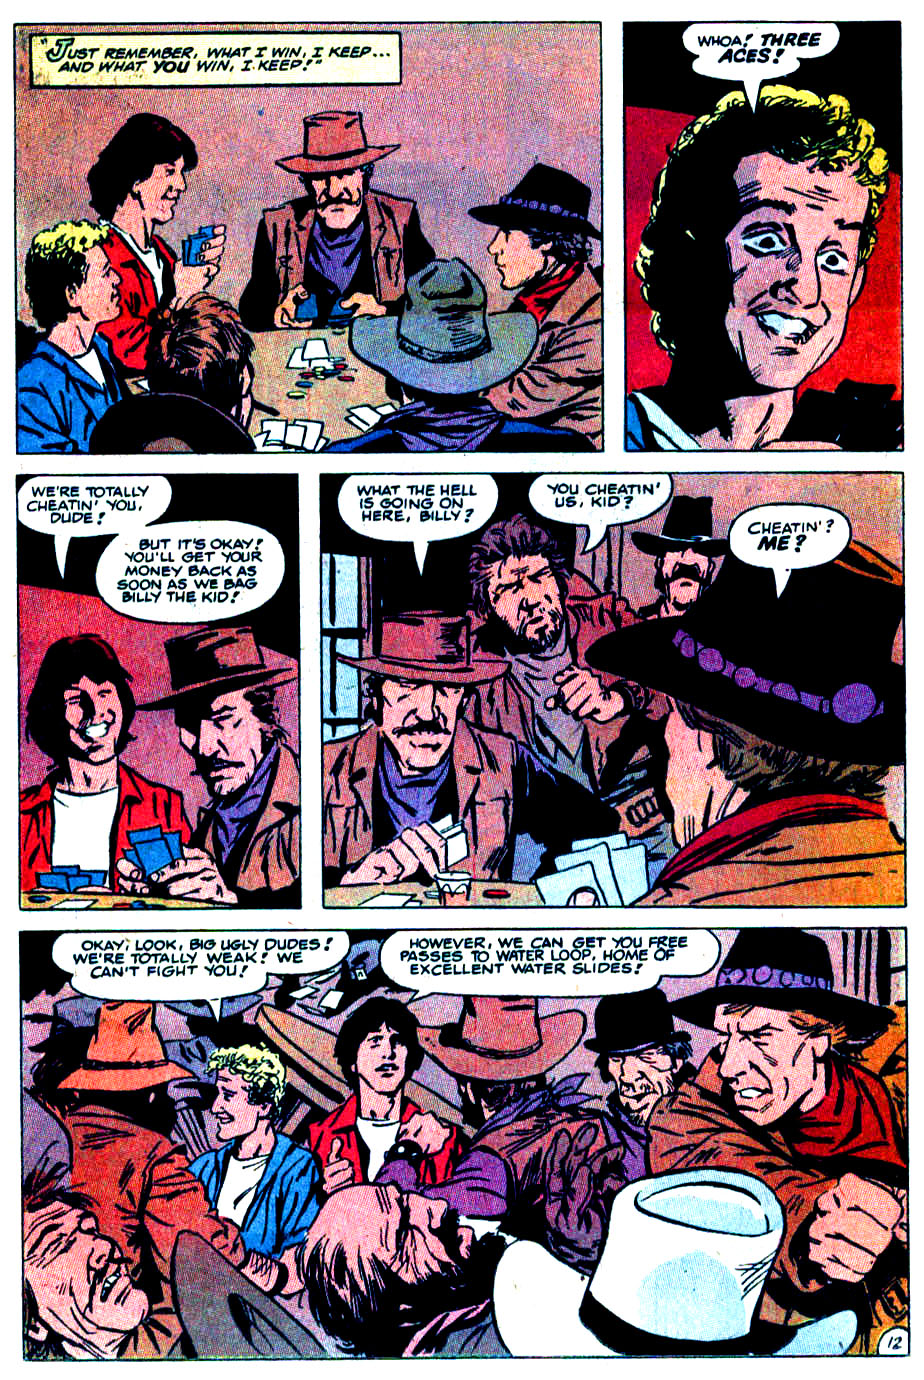 Read online Bill & Ted's Excellent Adventure comic -  Issue # Full - 12